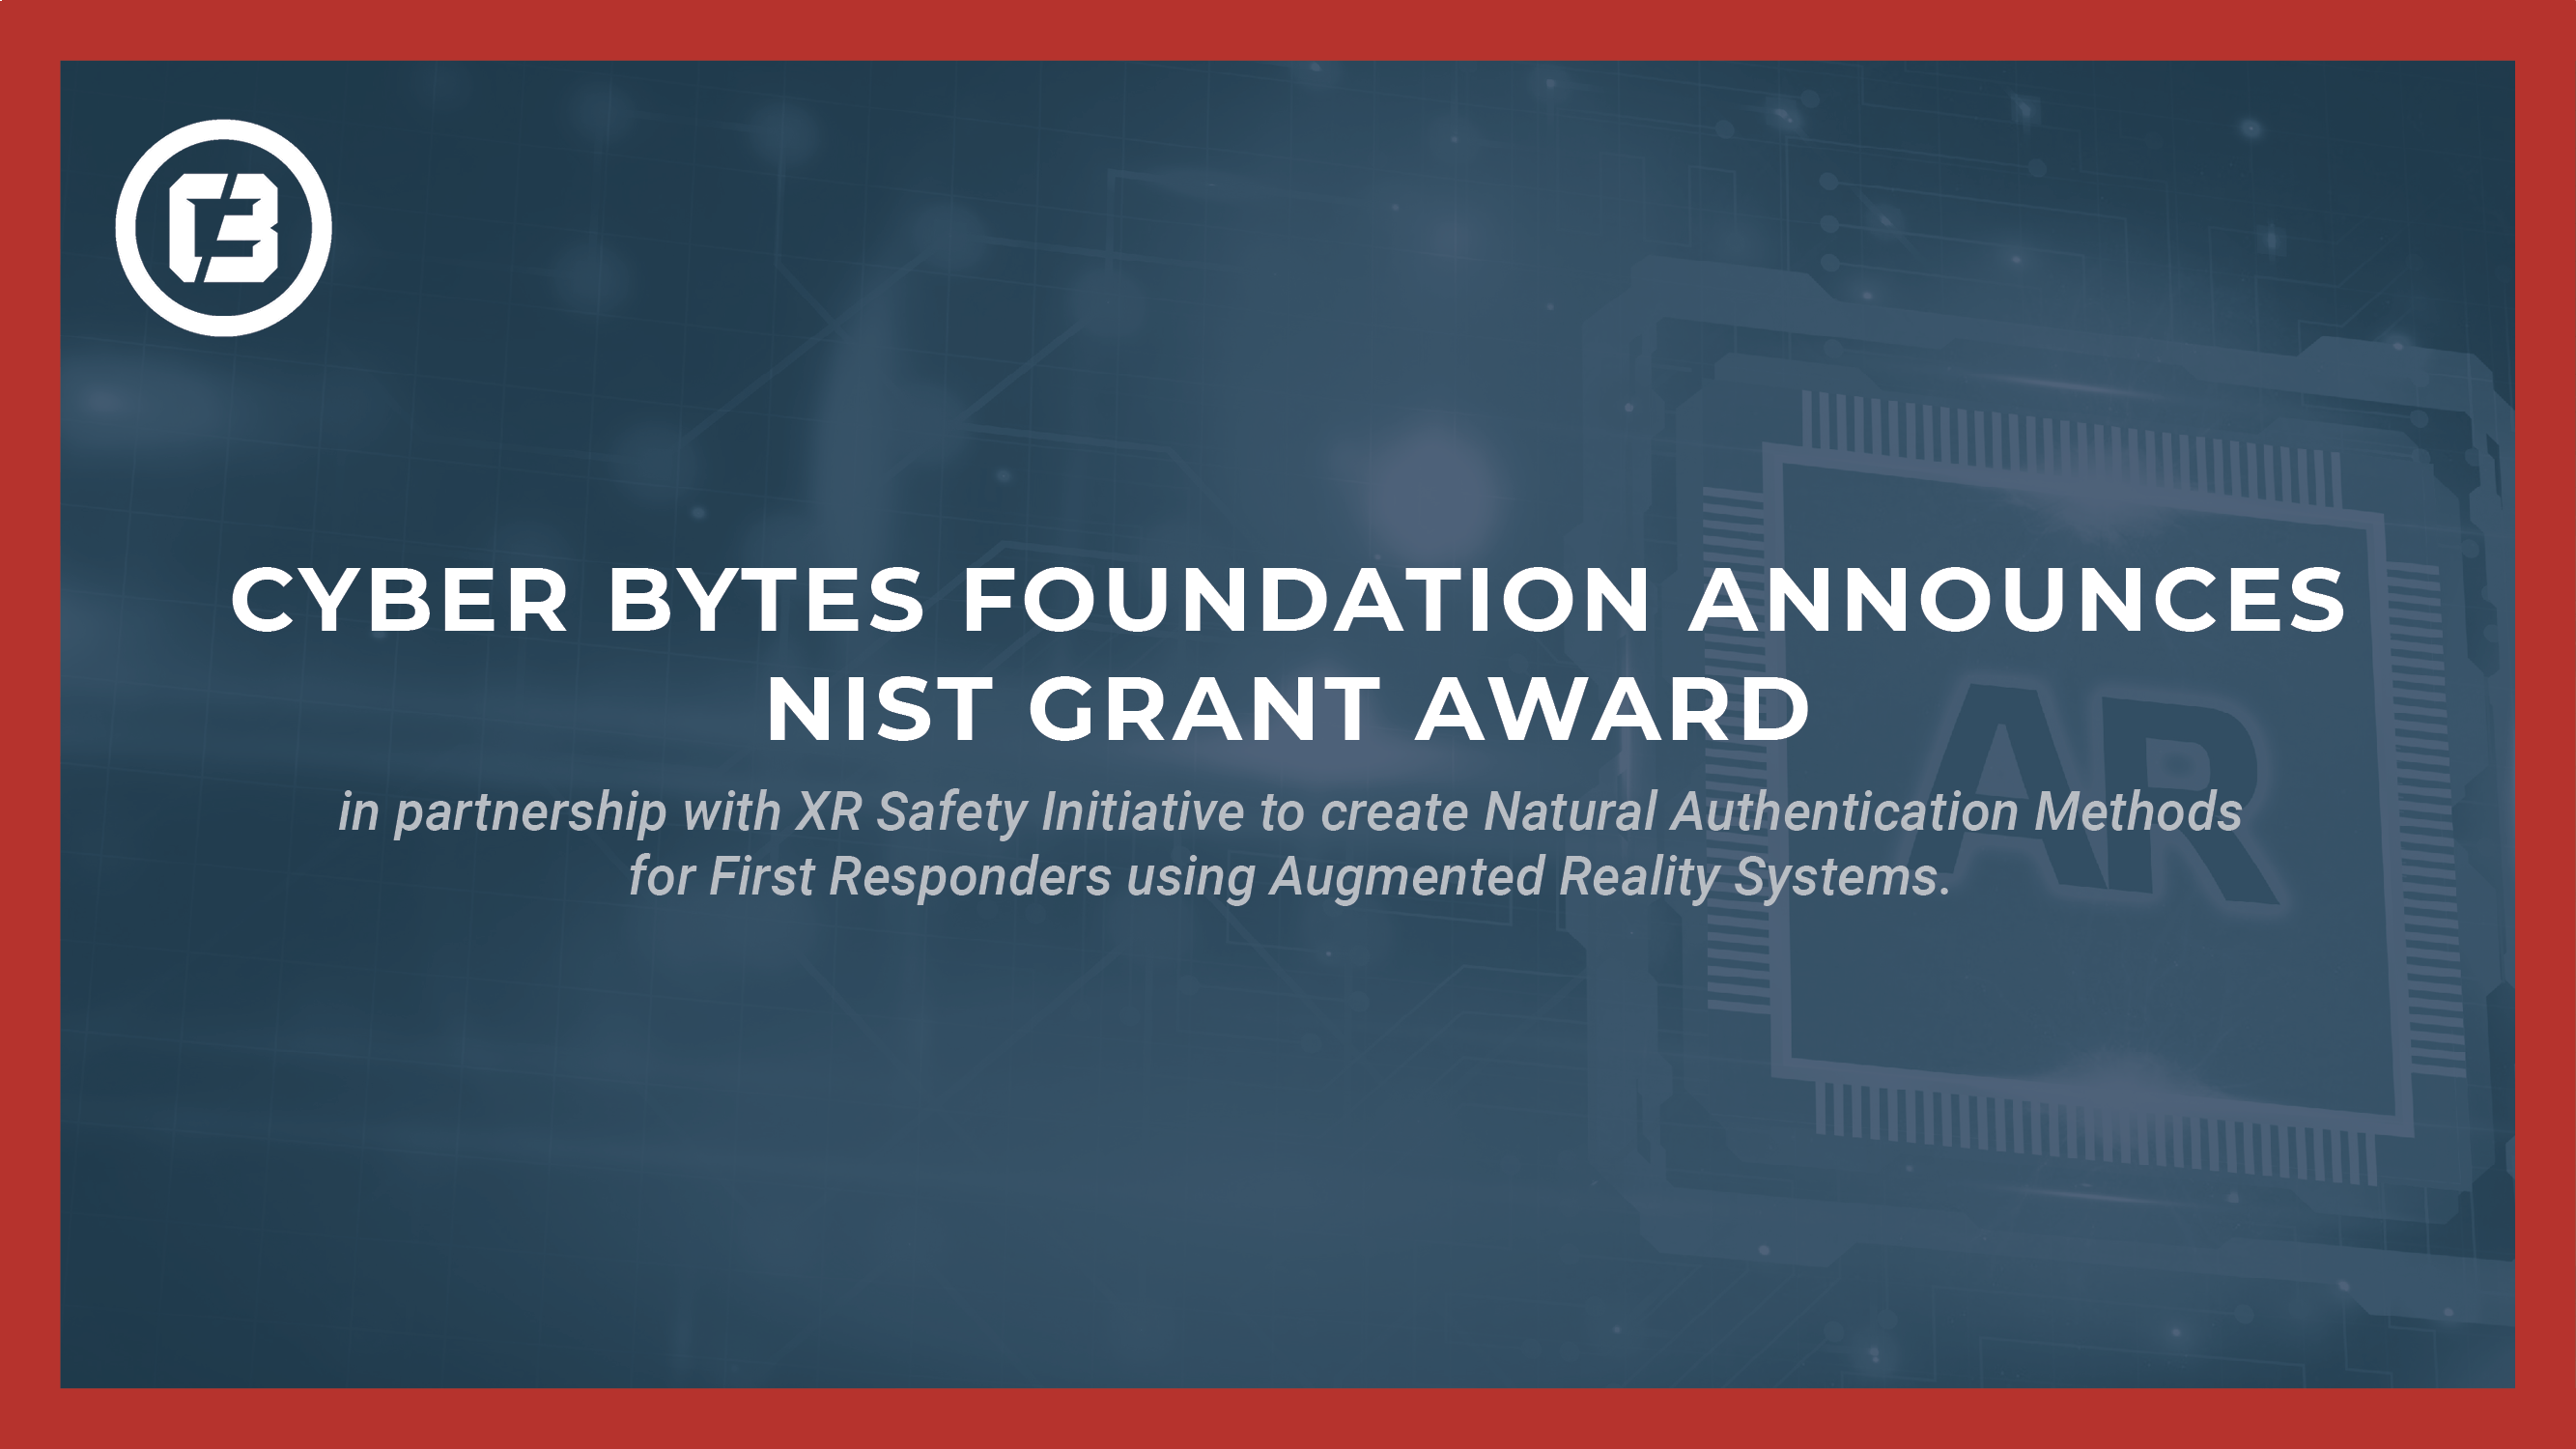 YBER BYTES FOUNDATION ANNOUNCES GRANT AWARD TO CREATE NATURAL AUTHENTICATION METHODS FOR FIRST RESPONDERS USING AUGMENTED REALITY SYSTEMS